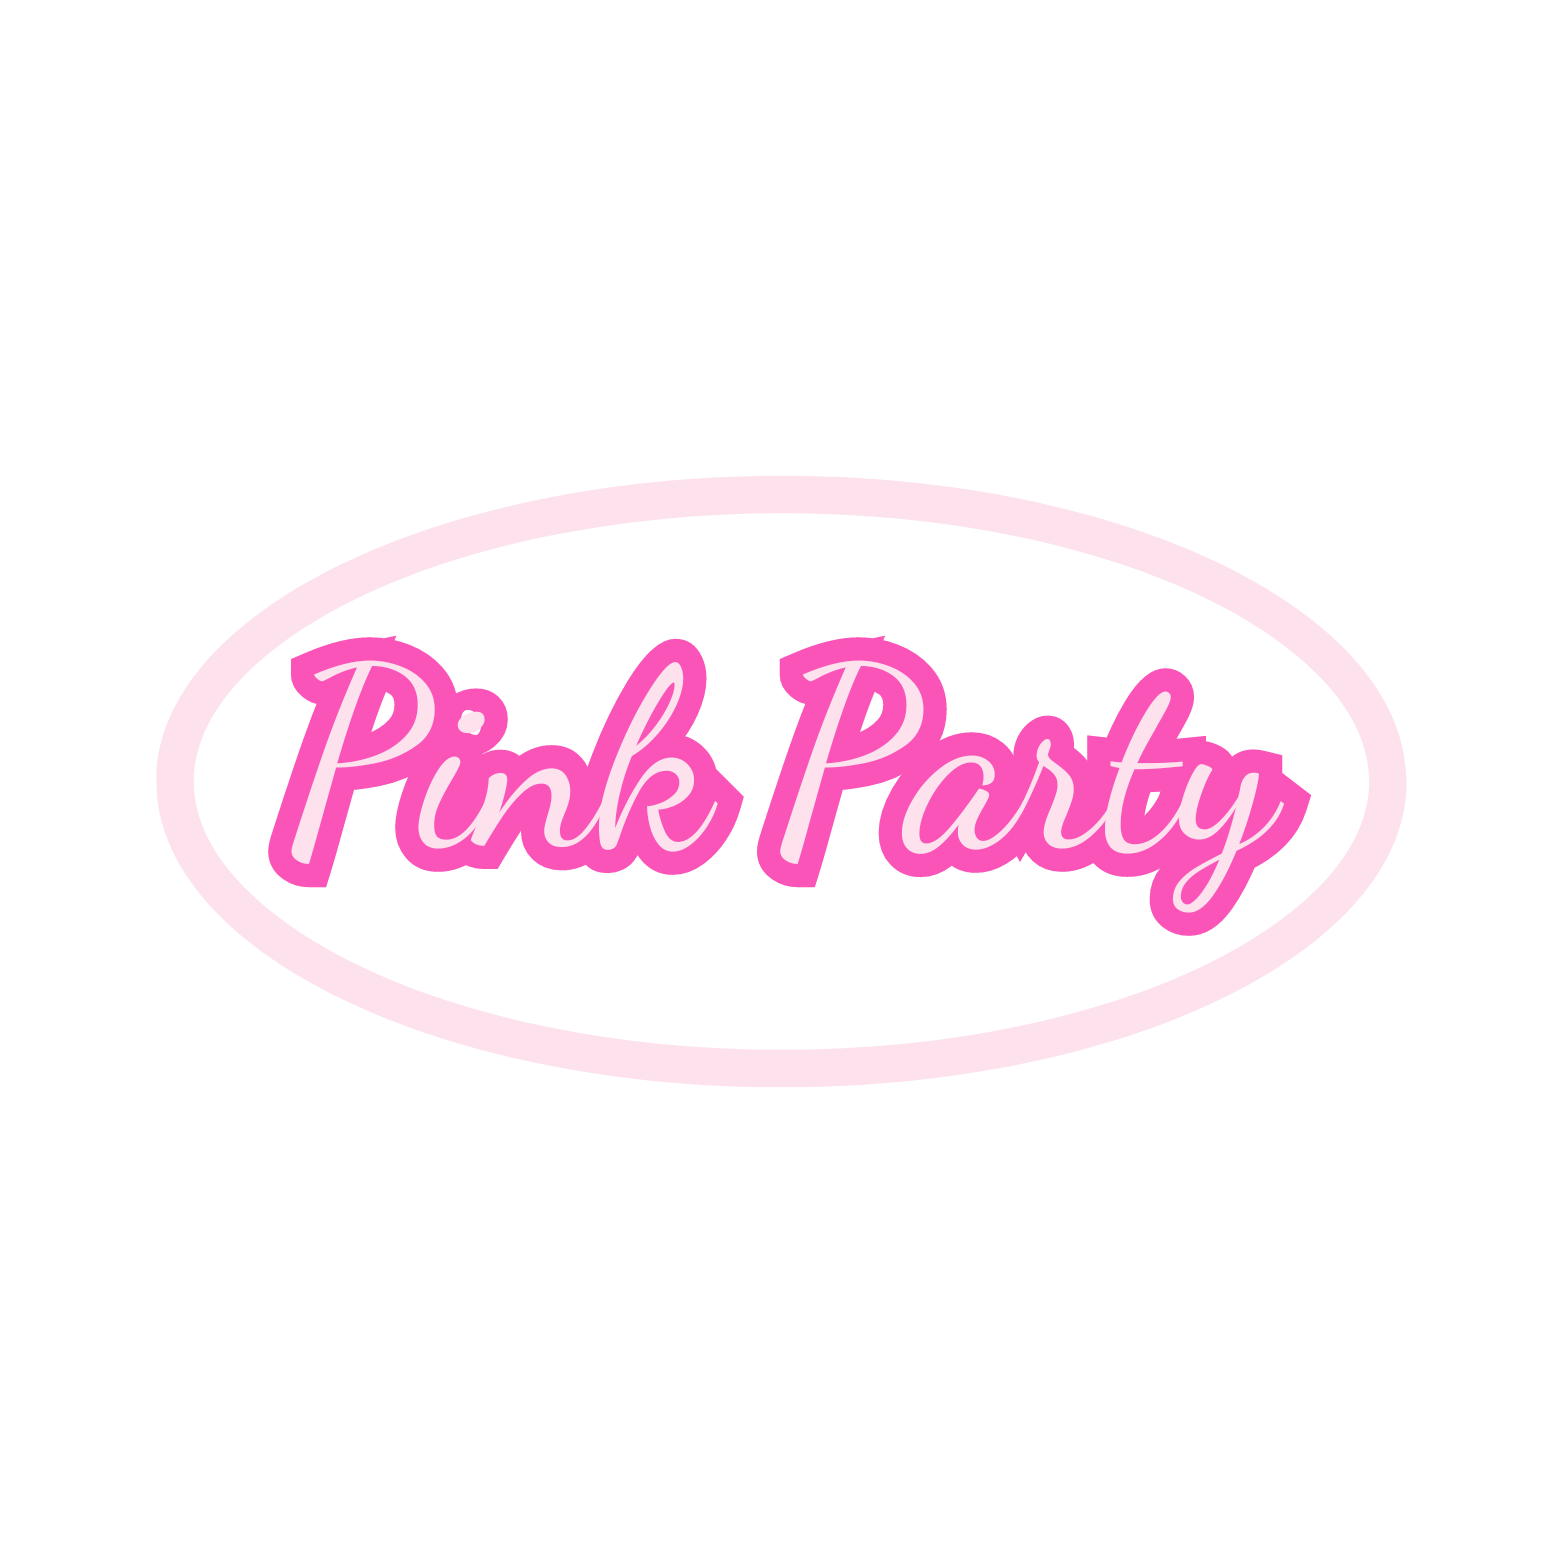 Pink Party on black.png